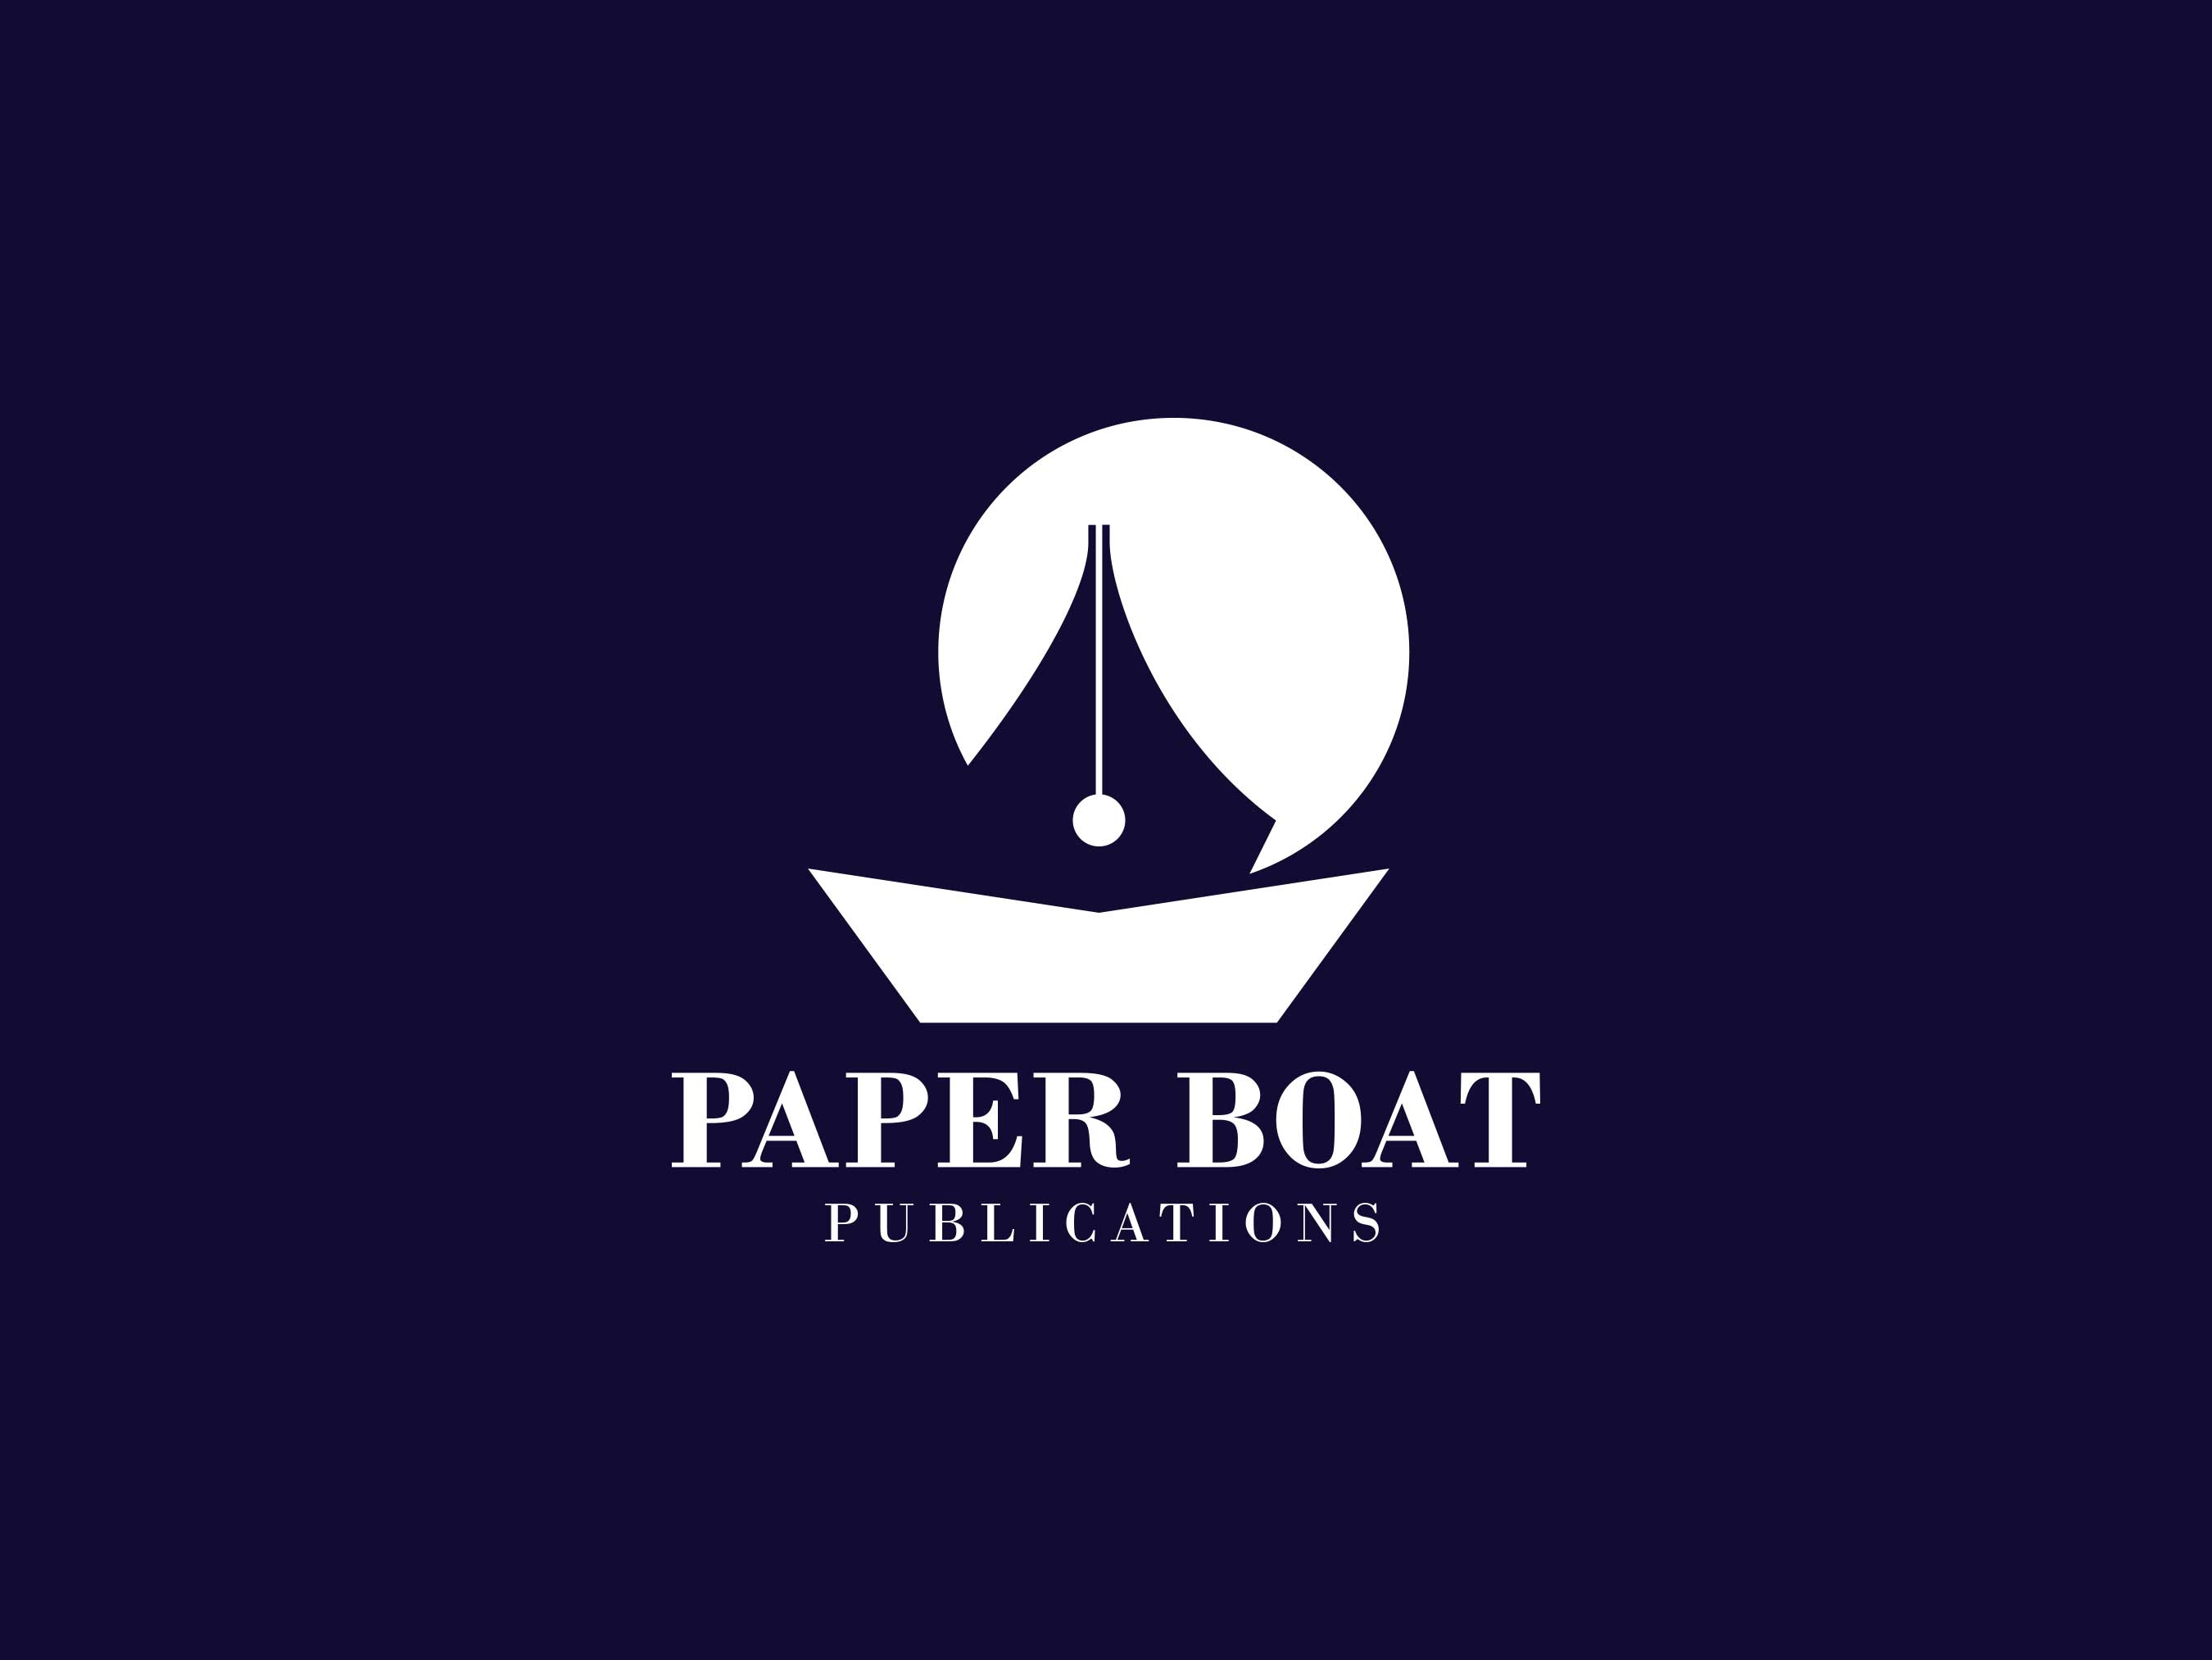 Paper Boat Line Art Logo Vector Illustration Design , Golden Paper Boat For  Study , Company Template Royalty Free SVG, Cliparts, Vectors, and Stock  Illustration. Image 167131772.